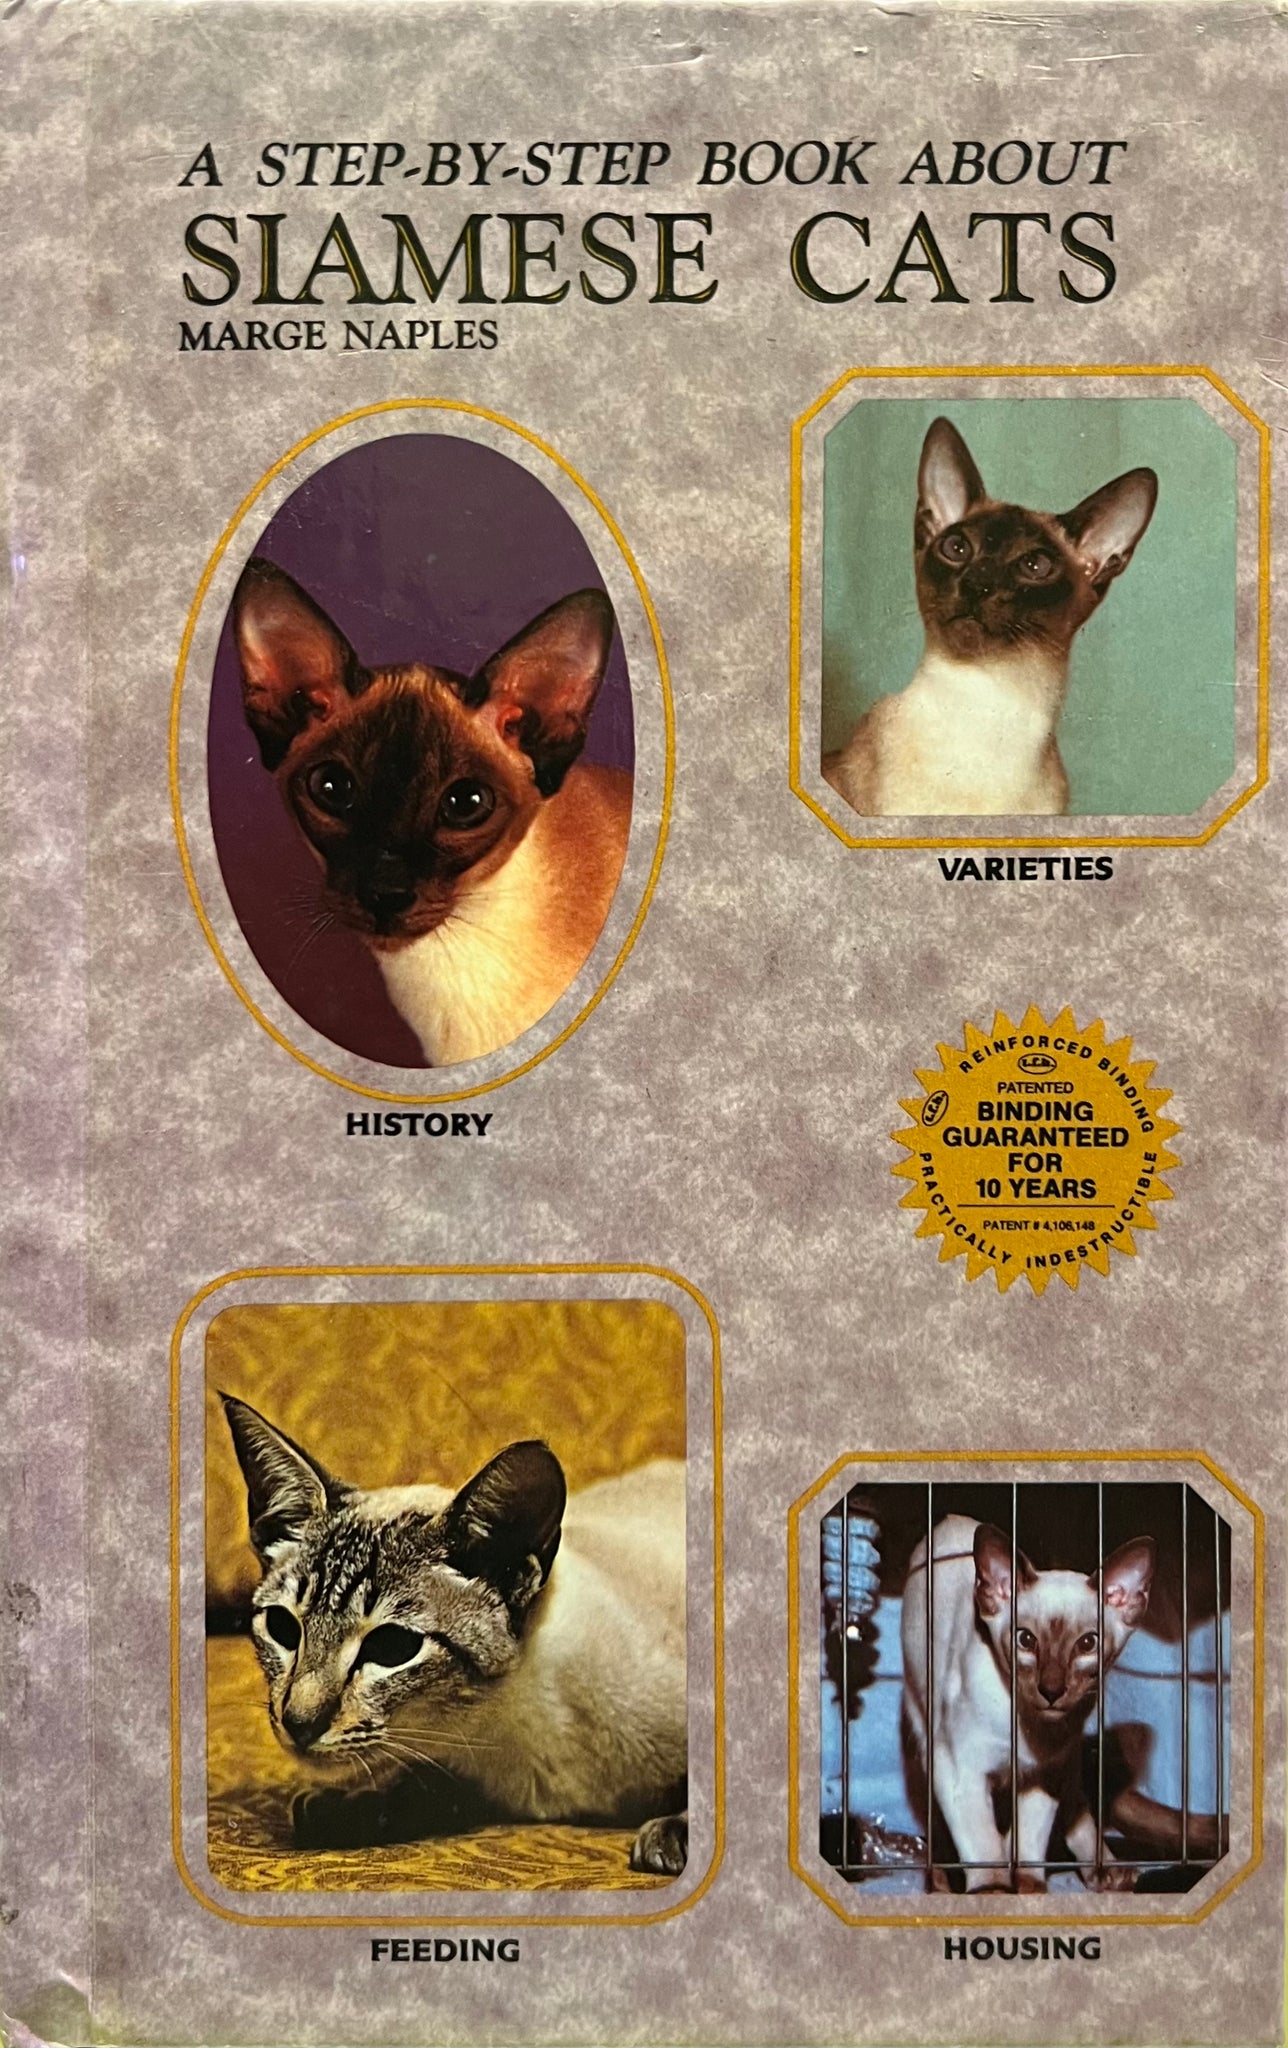 A Step-by-Step Book About Siamese Cats, Marge Naples